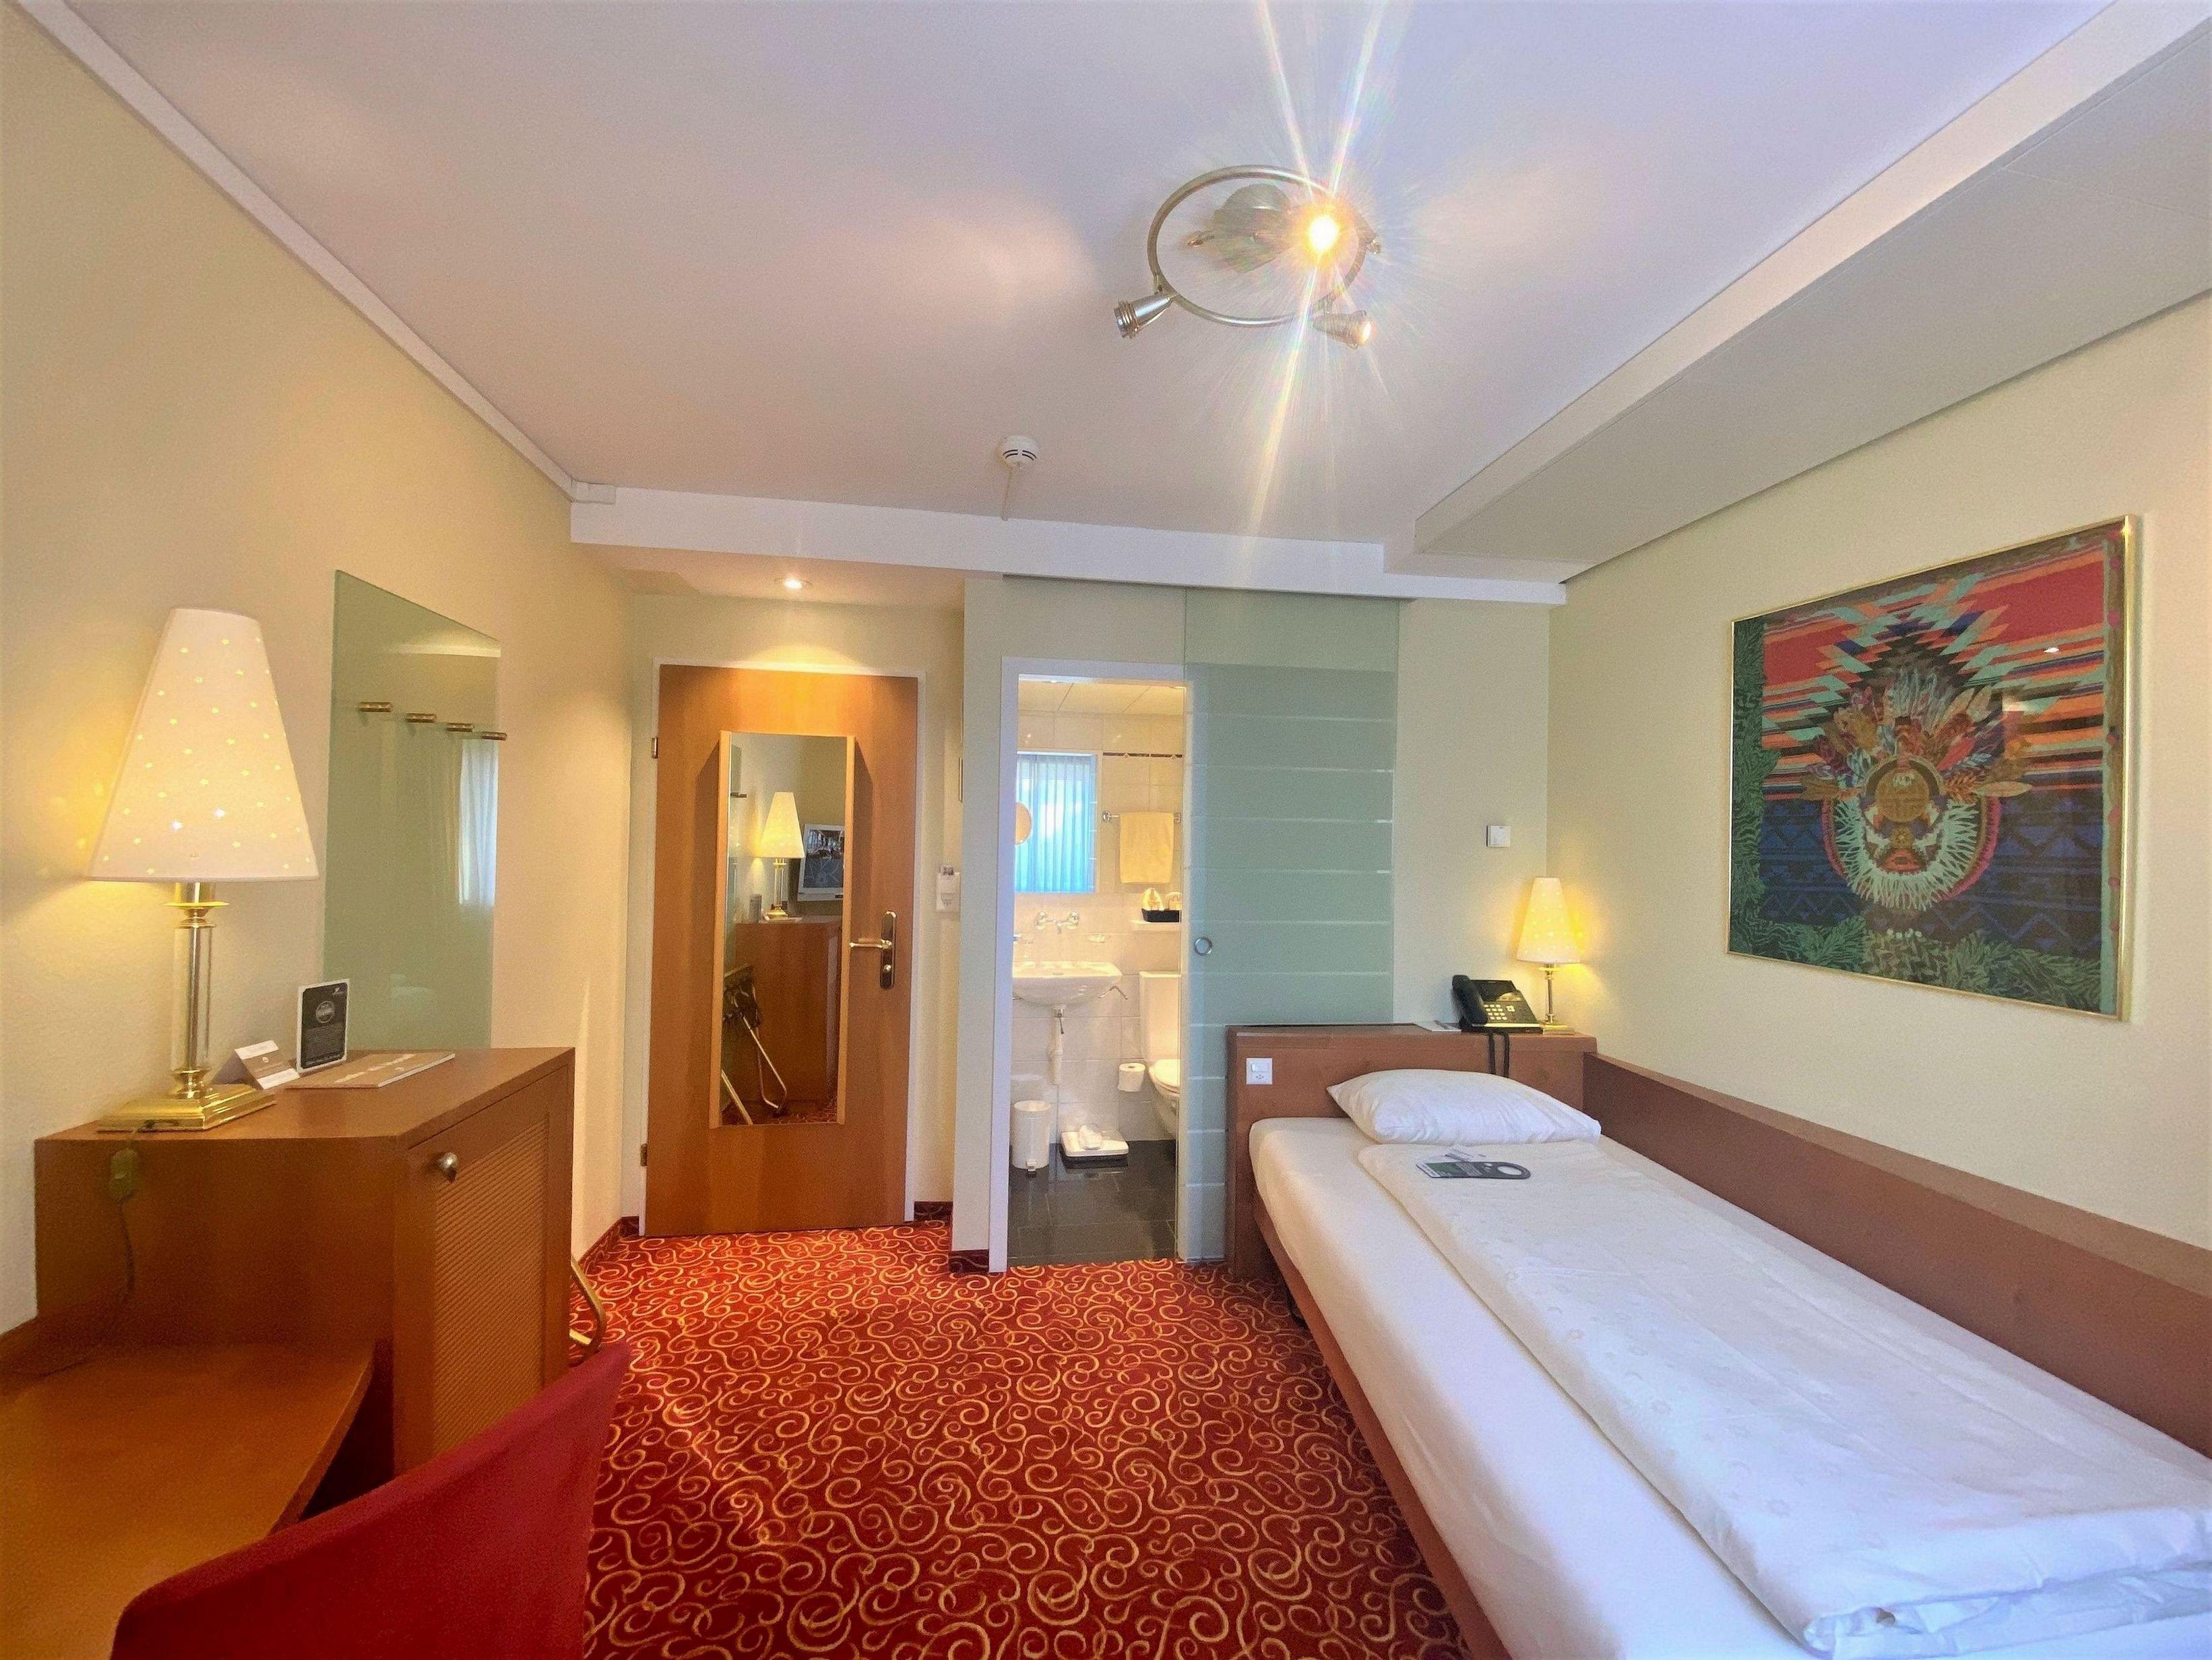 Our Eco Single rooms offer a warm and homely ambiance. They are ideal for short stays. These rooms are fitted with a Single size bed and come with a shower.